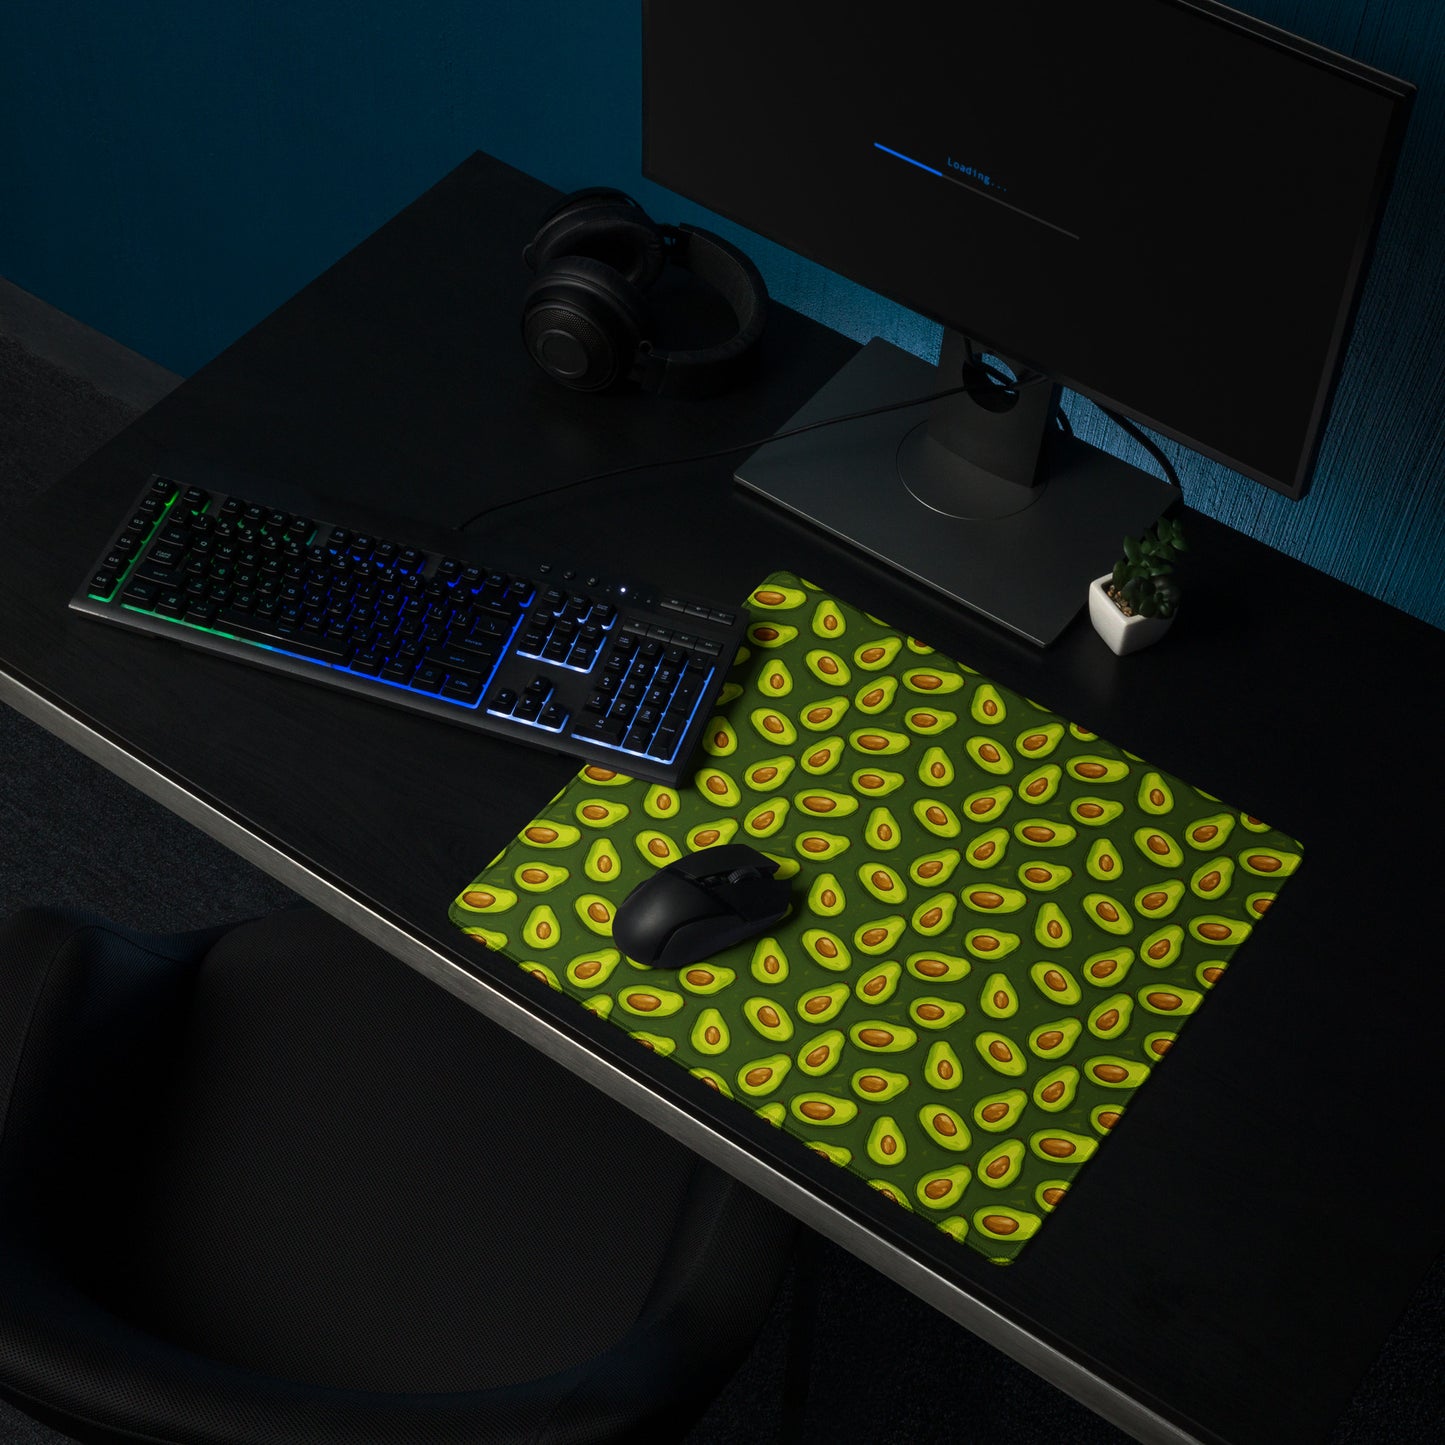 A 18" x 16" desk pad with lots of avocados on it shown on a desk setup. Green in color.